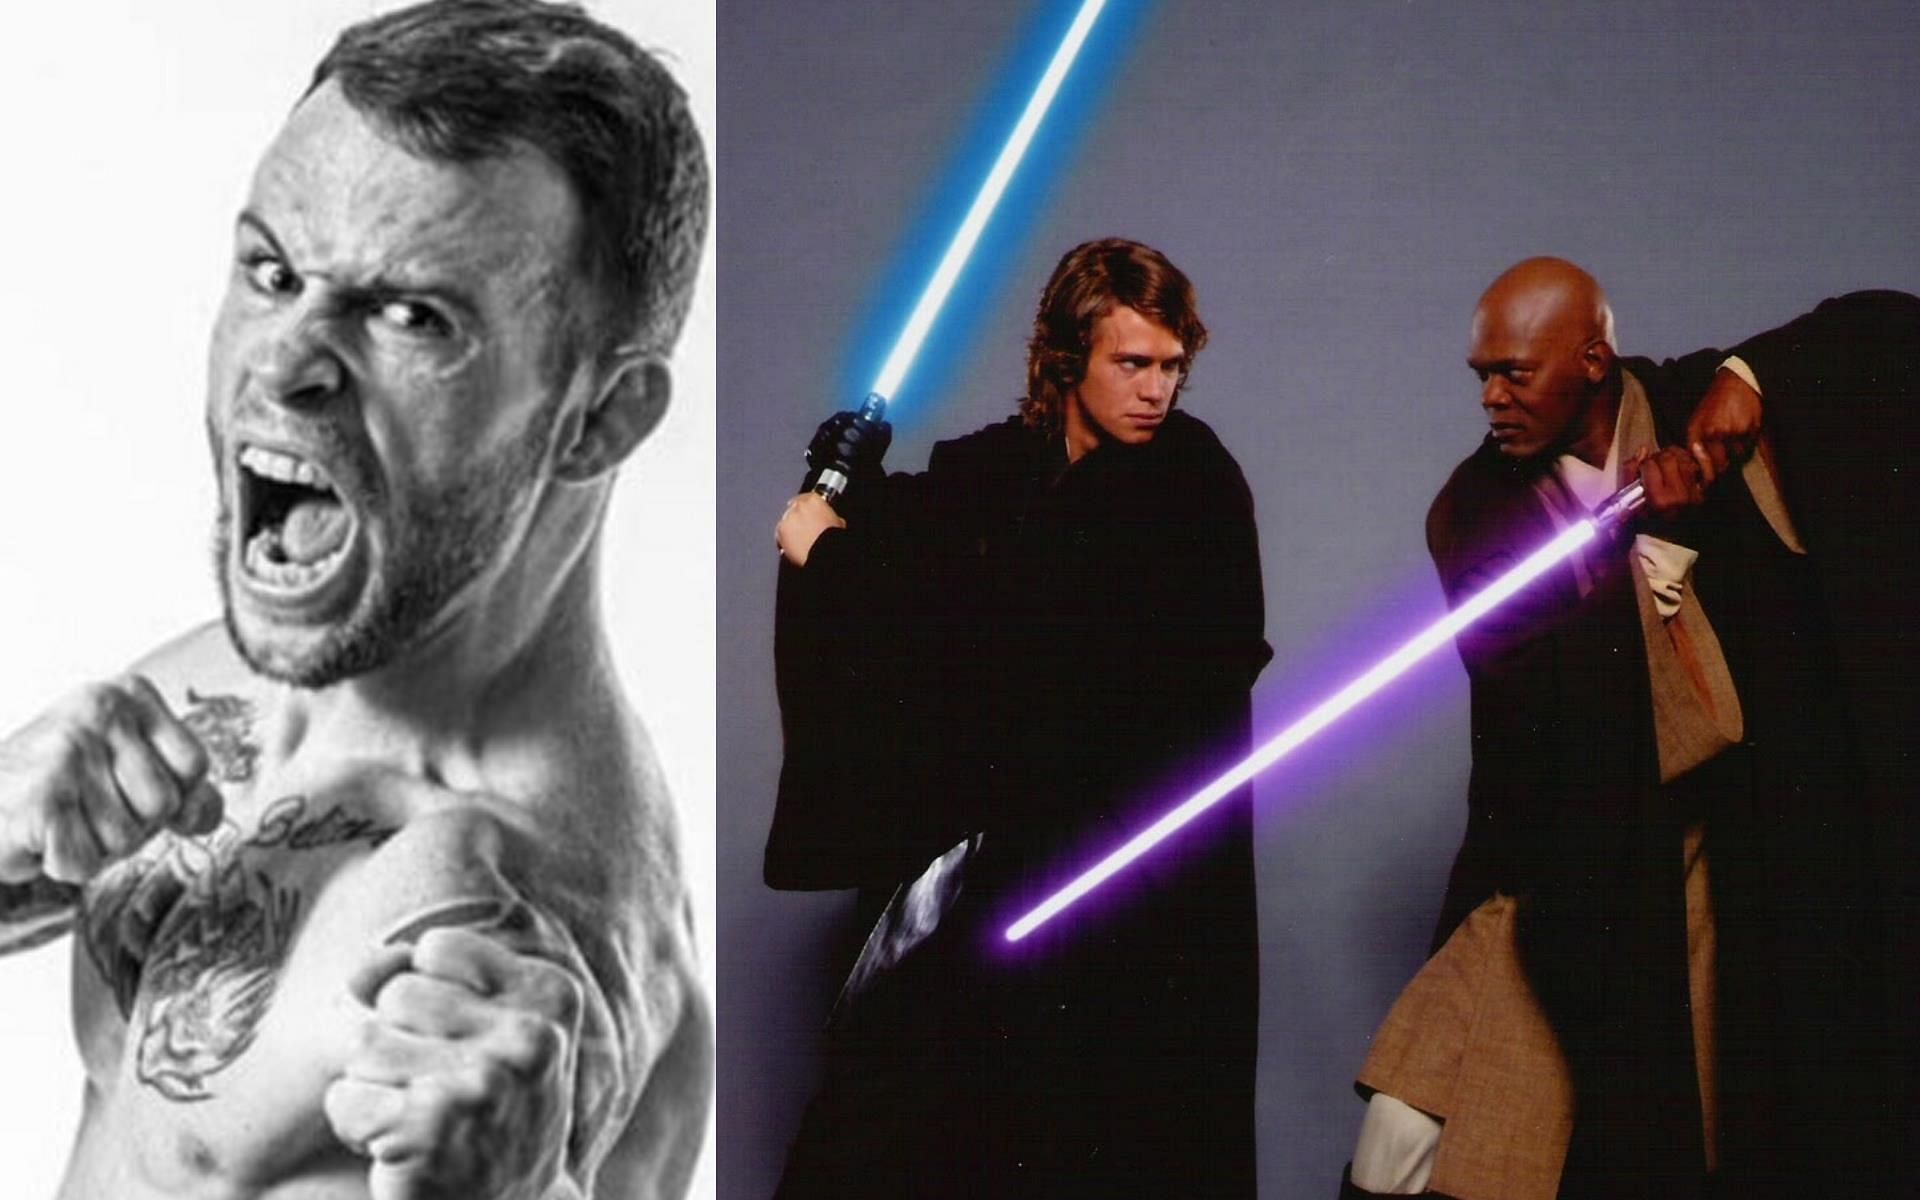 Anakin Skywalker (Center) and Mace Windu (Right) are two characters from Star Wars that seem to have resonated most with Jarred Brooks (Left) | [Photos: ONE Championship/Comic Vine]